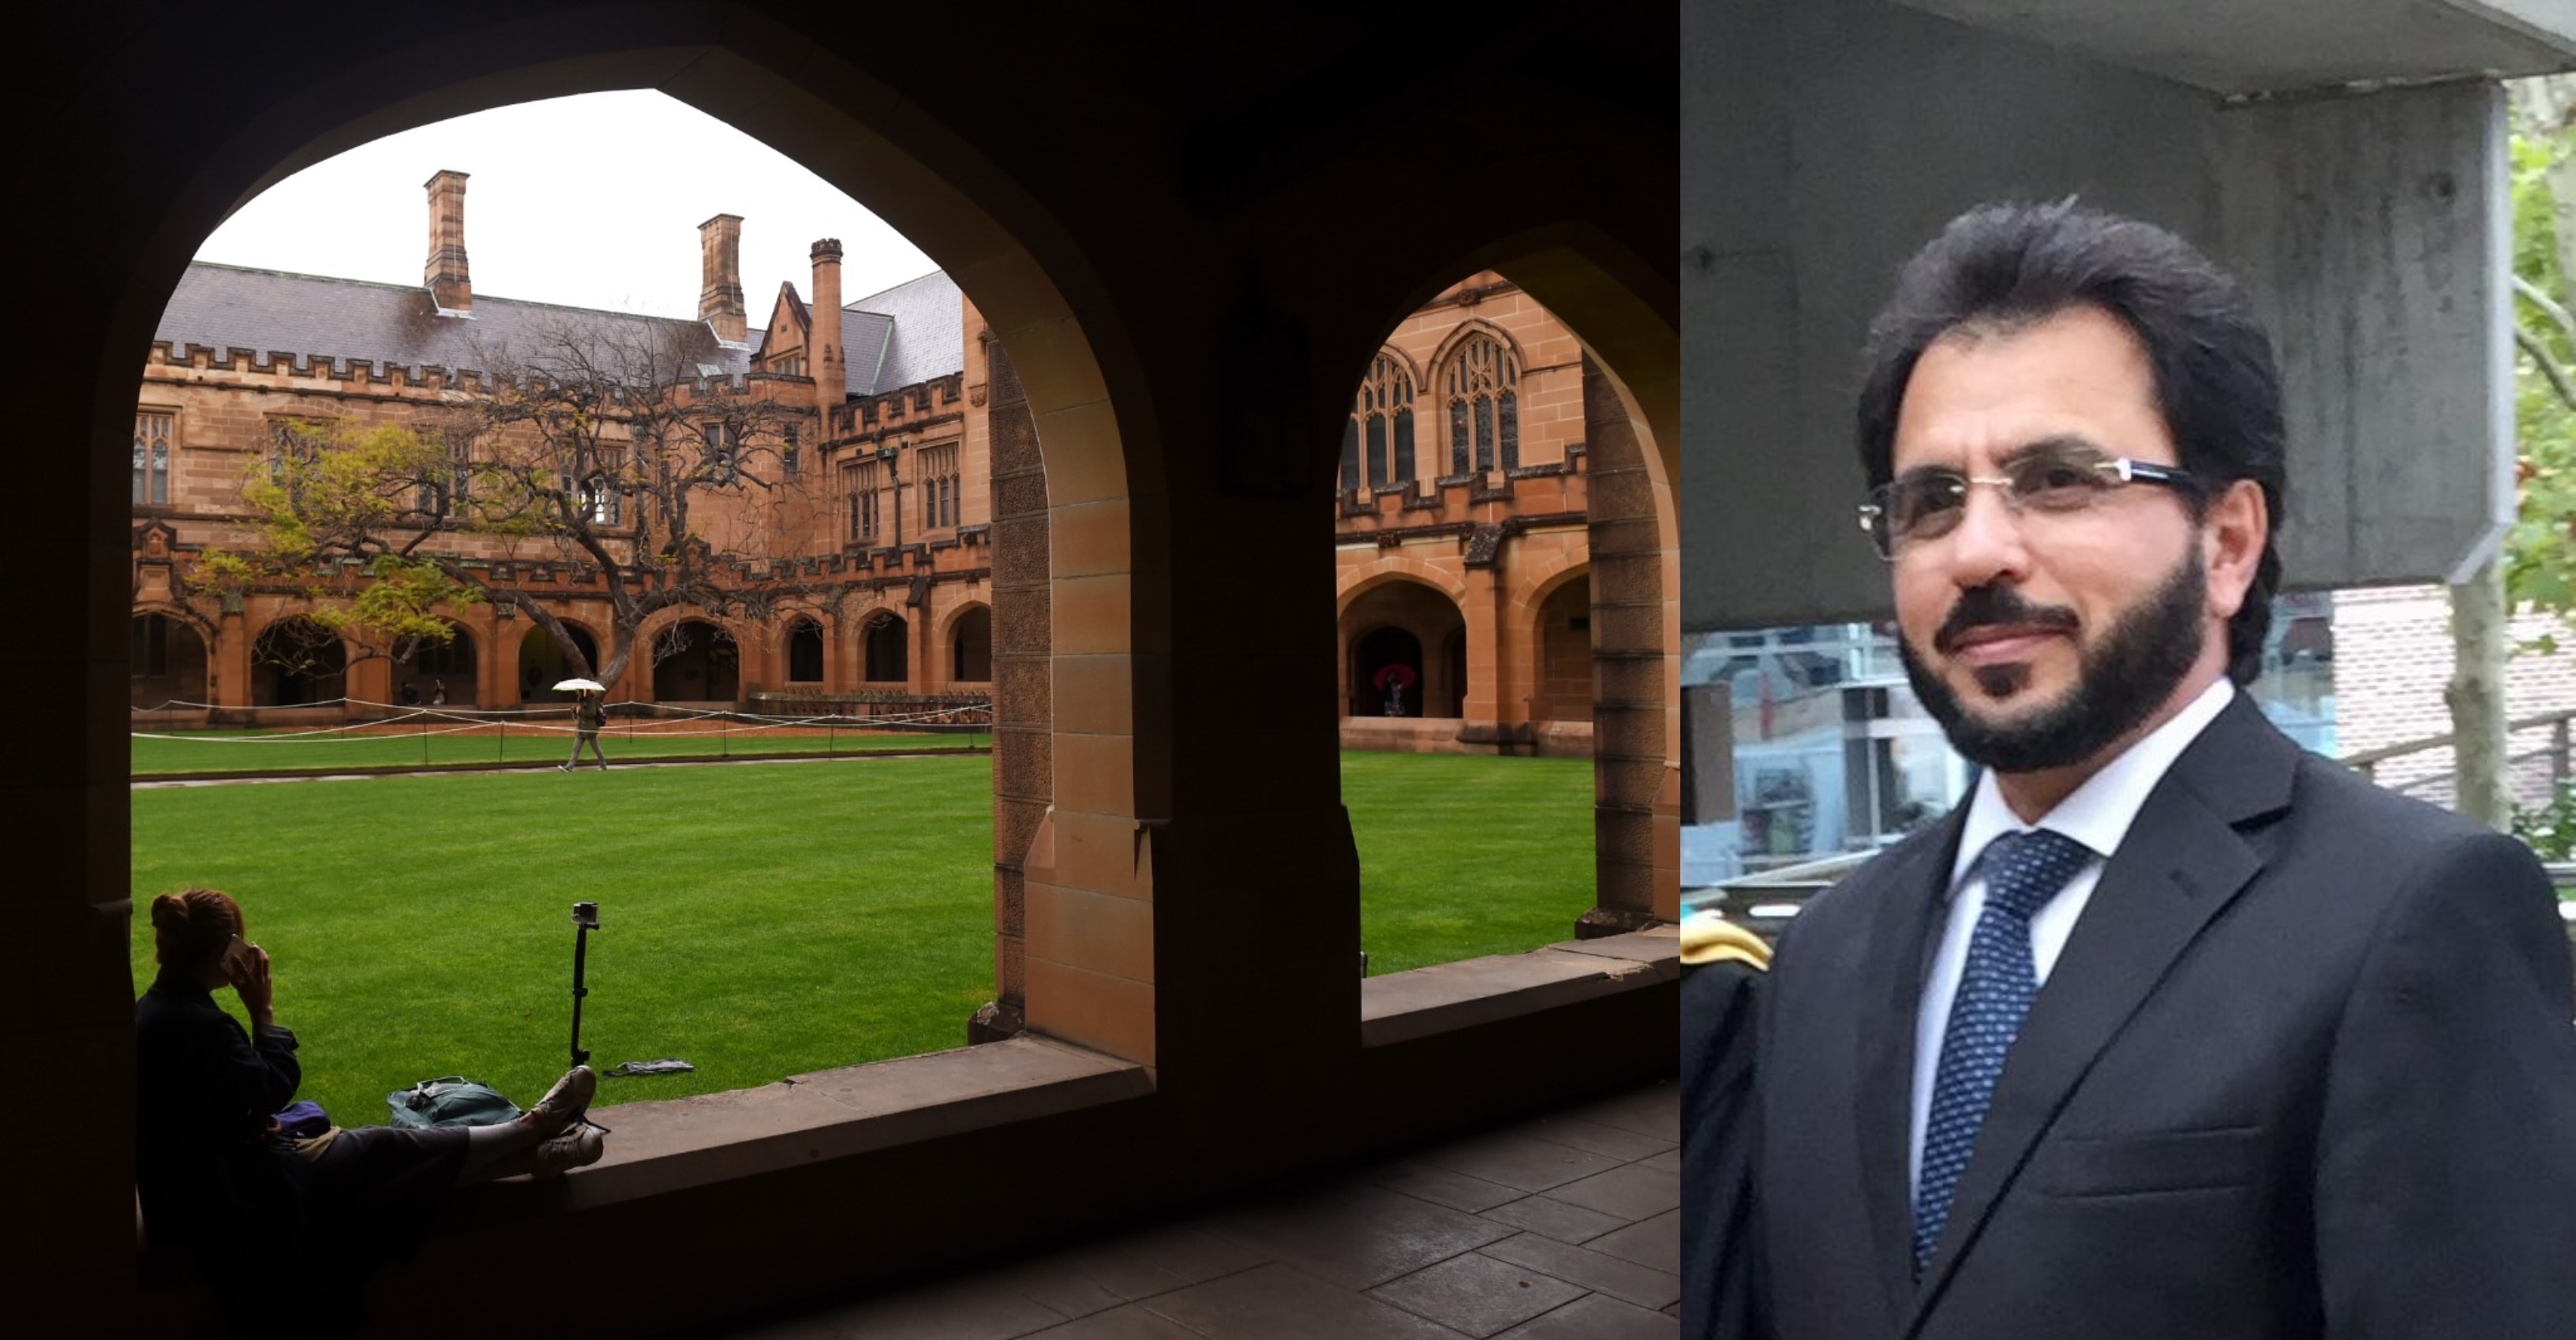 Dr Ali Yunis Aldahesh will be teaching "Qur'anic Arabic" as a new subject at the Department of Arabic and Islamic Studies at Sydney University.